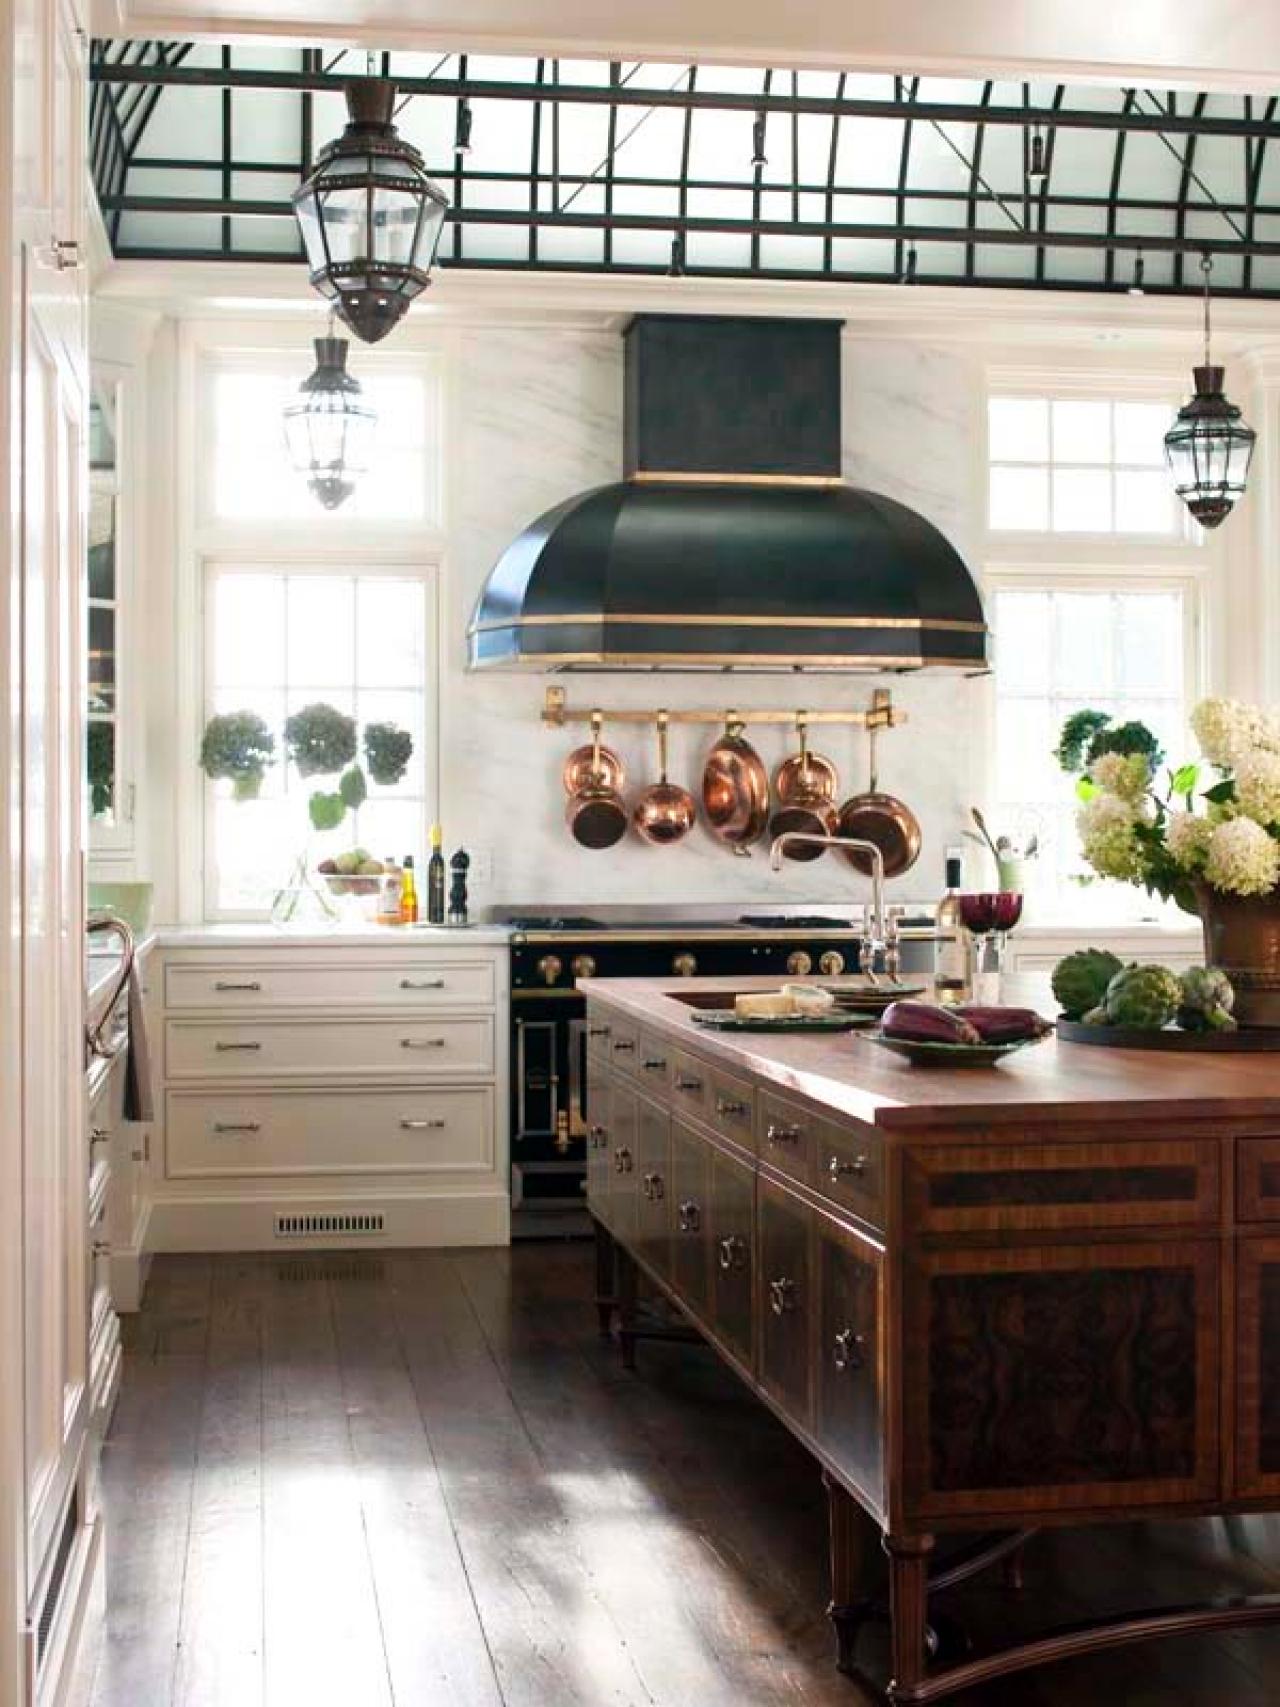 Antique Kitchens 2021 5 kitchen trends for 2021 you don't want to miss ...